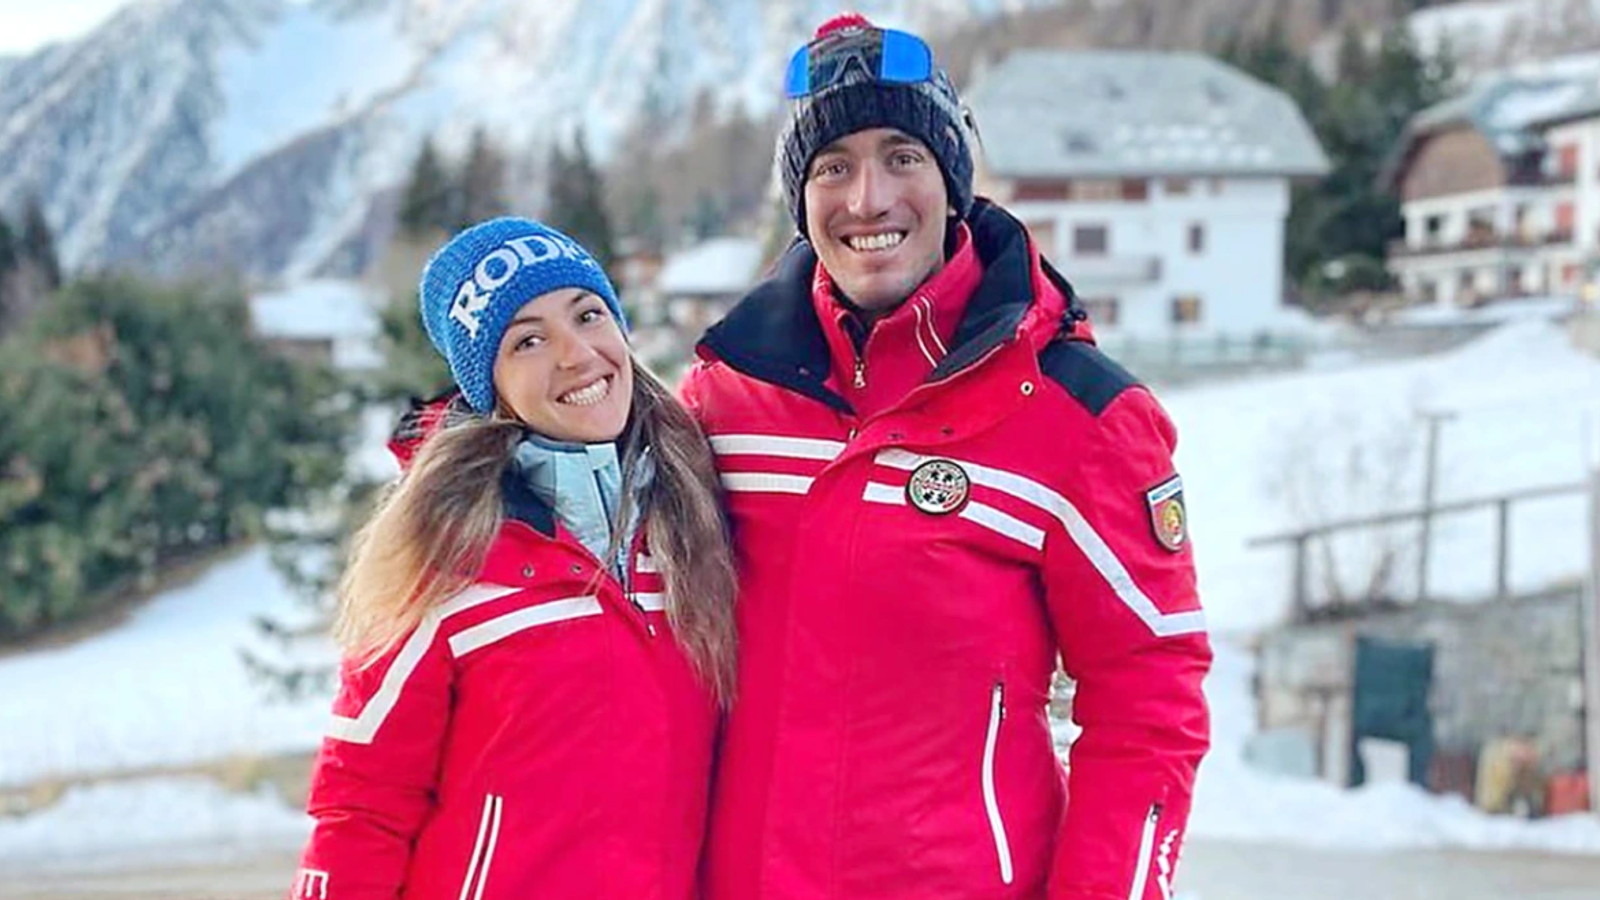 Tragic Accident: World Cup skier Jean Daniel Pession and his girlfriend die in a fatal fall on Italian mountain | World News